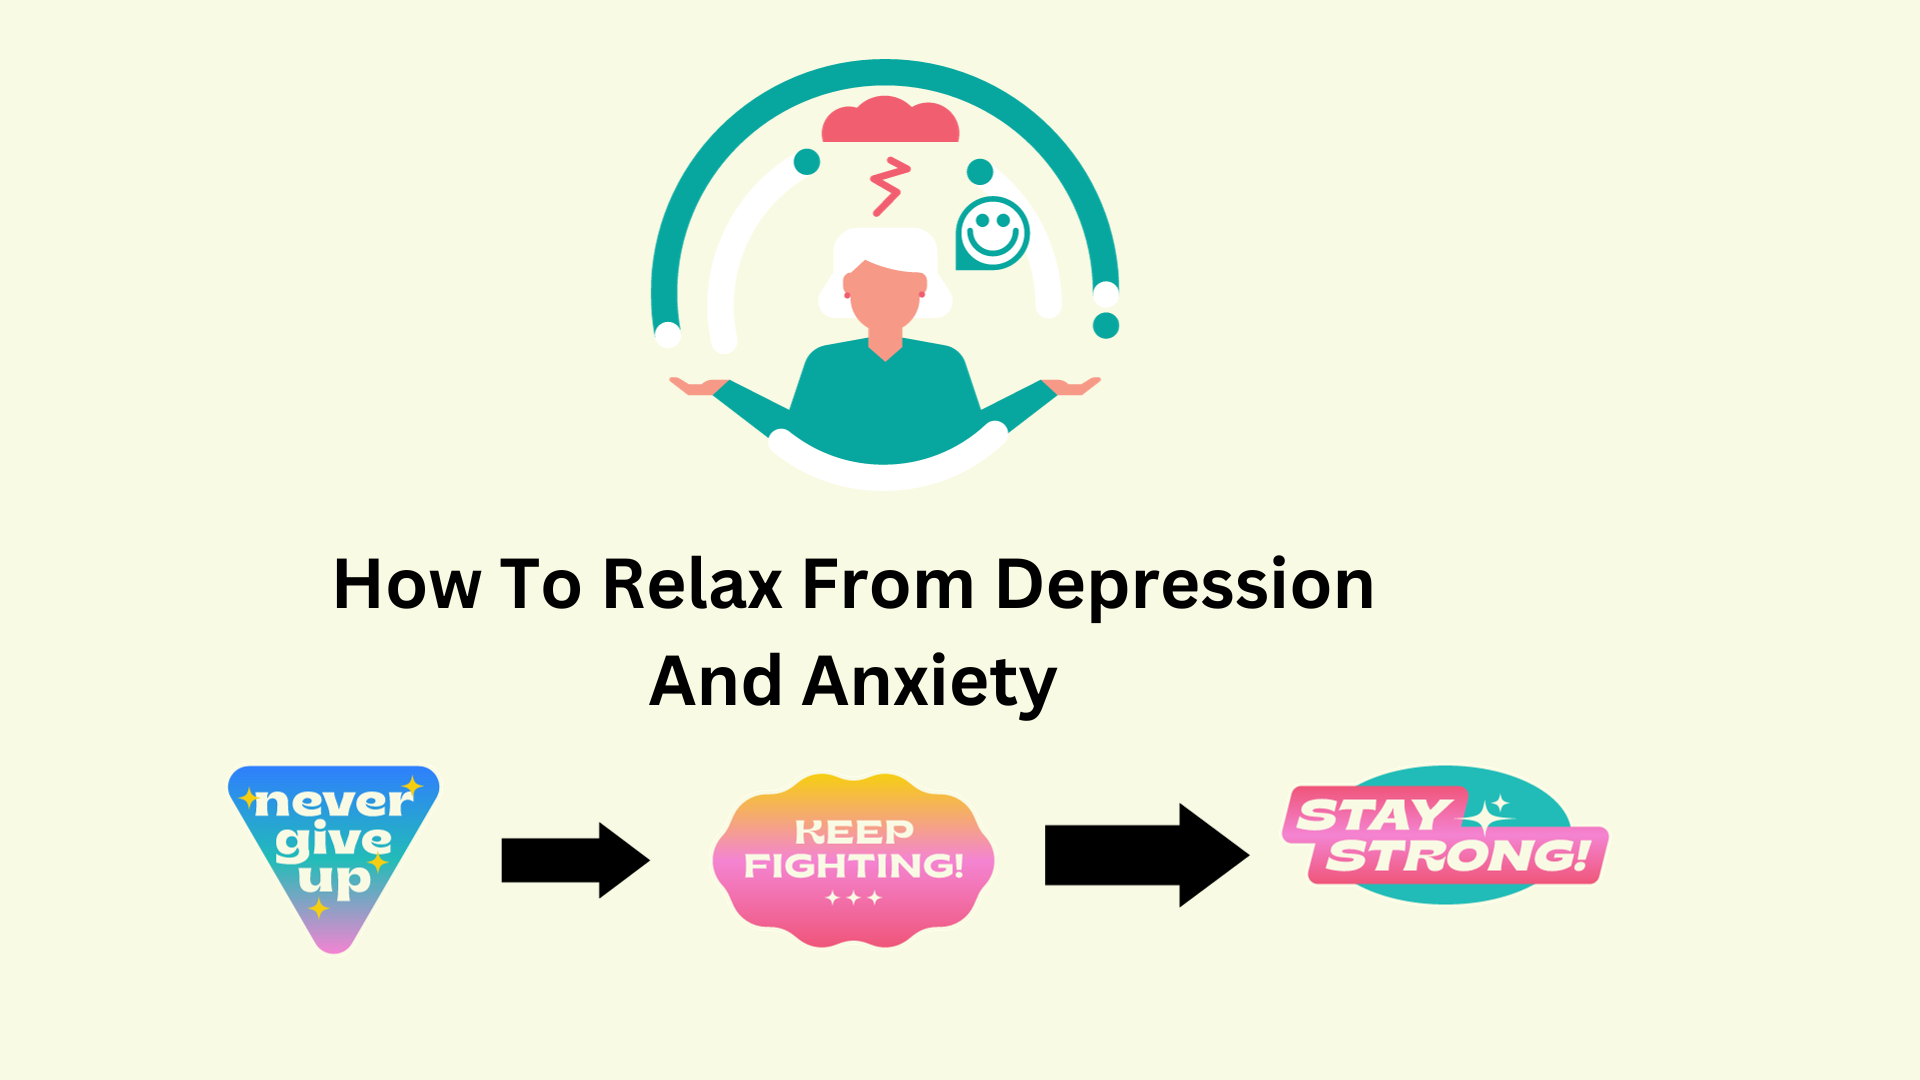 How To Relax From Depression And Anxiety